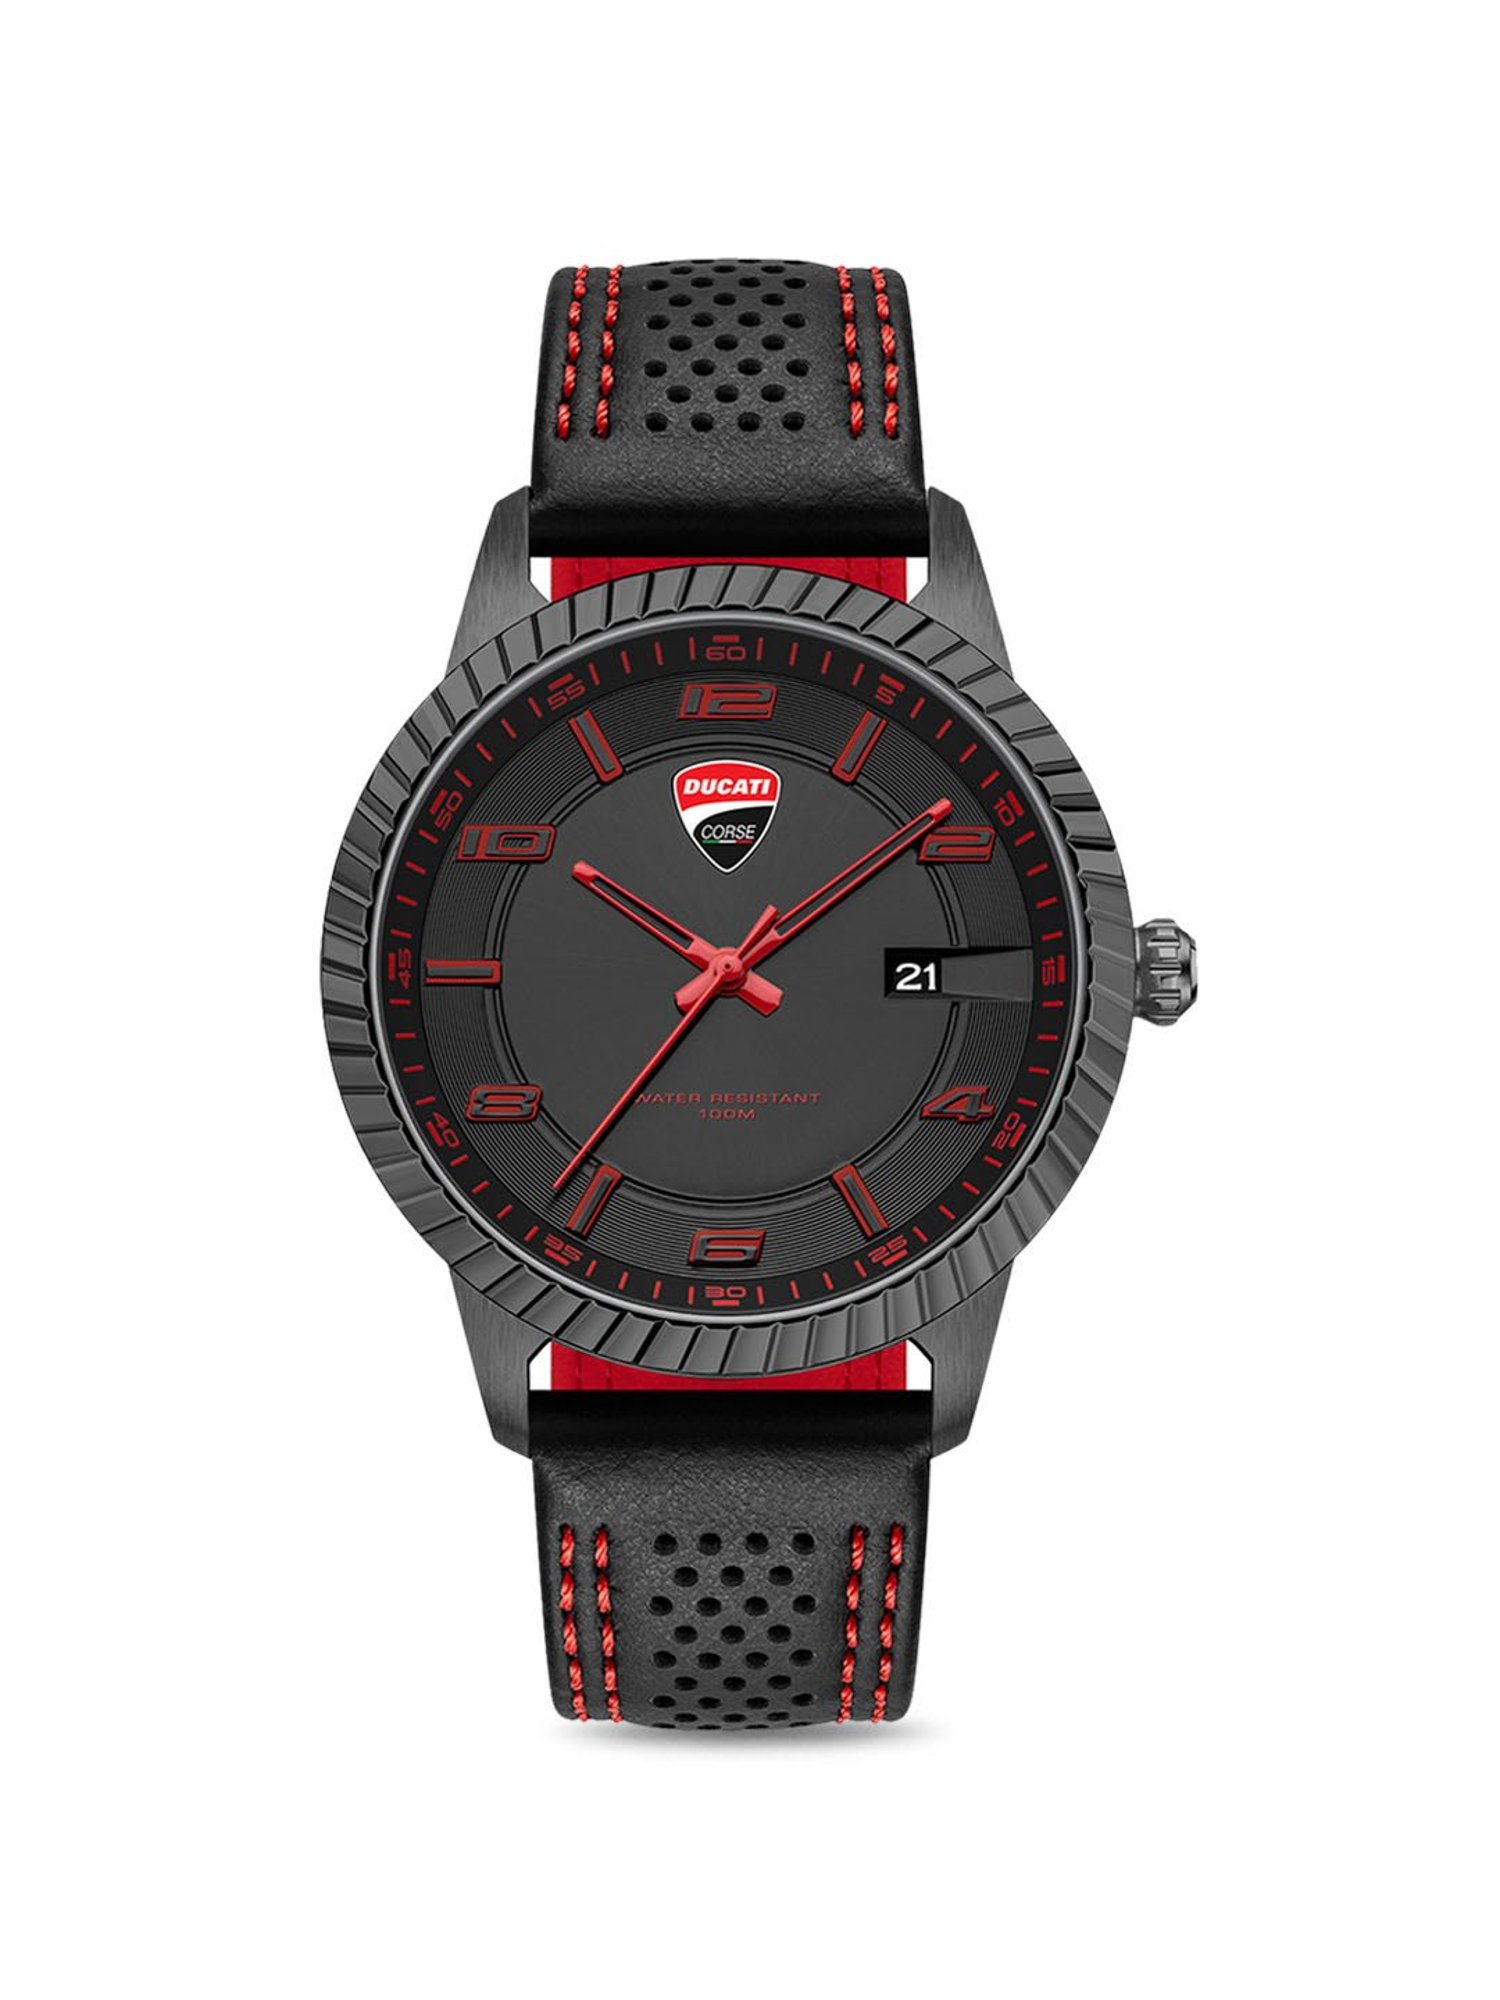 Bulgari teams up with Ducati to launch a limited edition watch based on its  sporty aluminium chronograph; Aluminium Extrusion, Profiles, Price, Scrap,  Recycling, Section